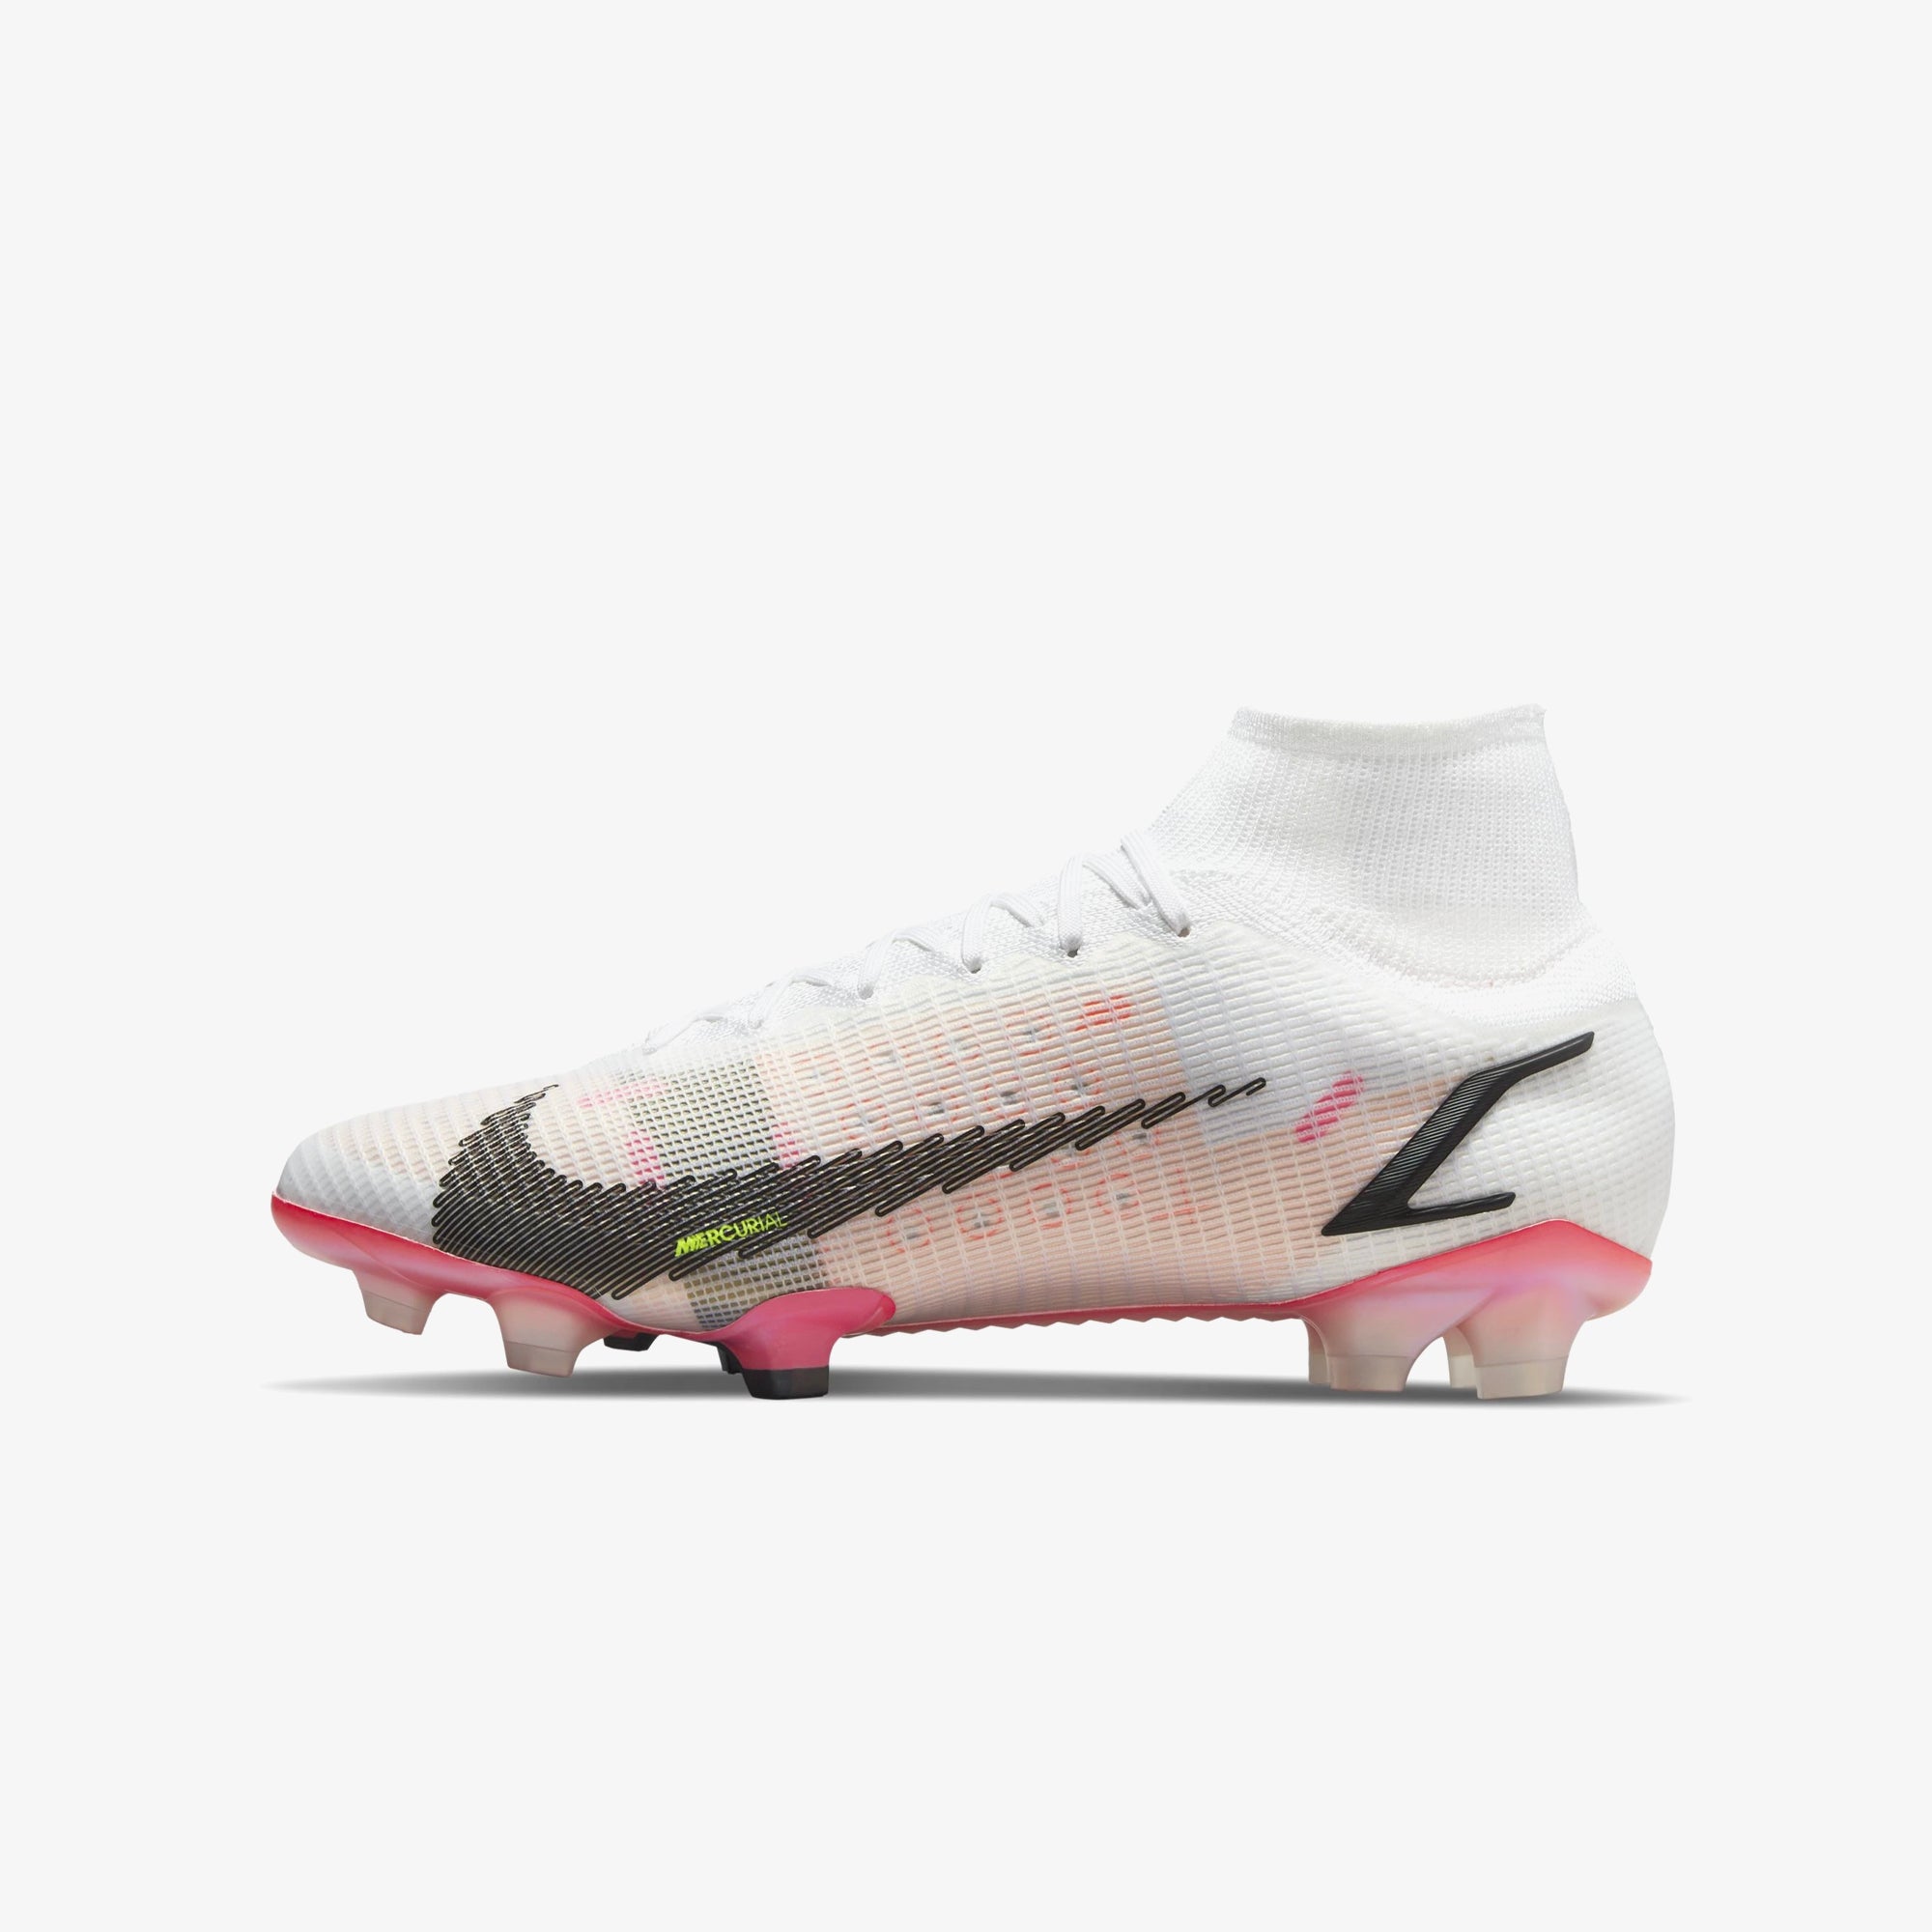 Nike Superfly 8 FG Firm-Ground Soccer Cleats